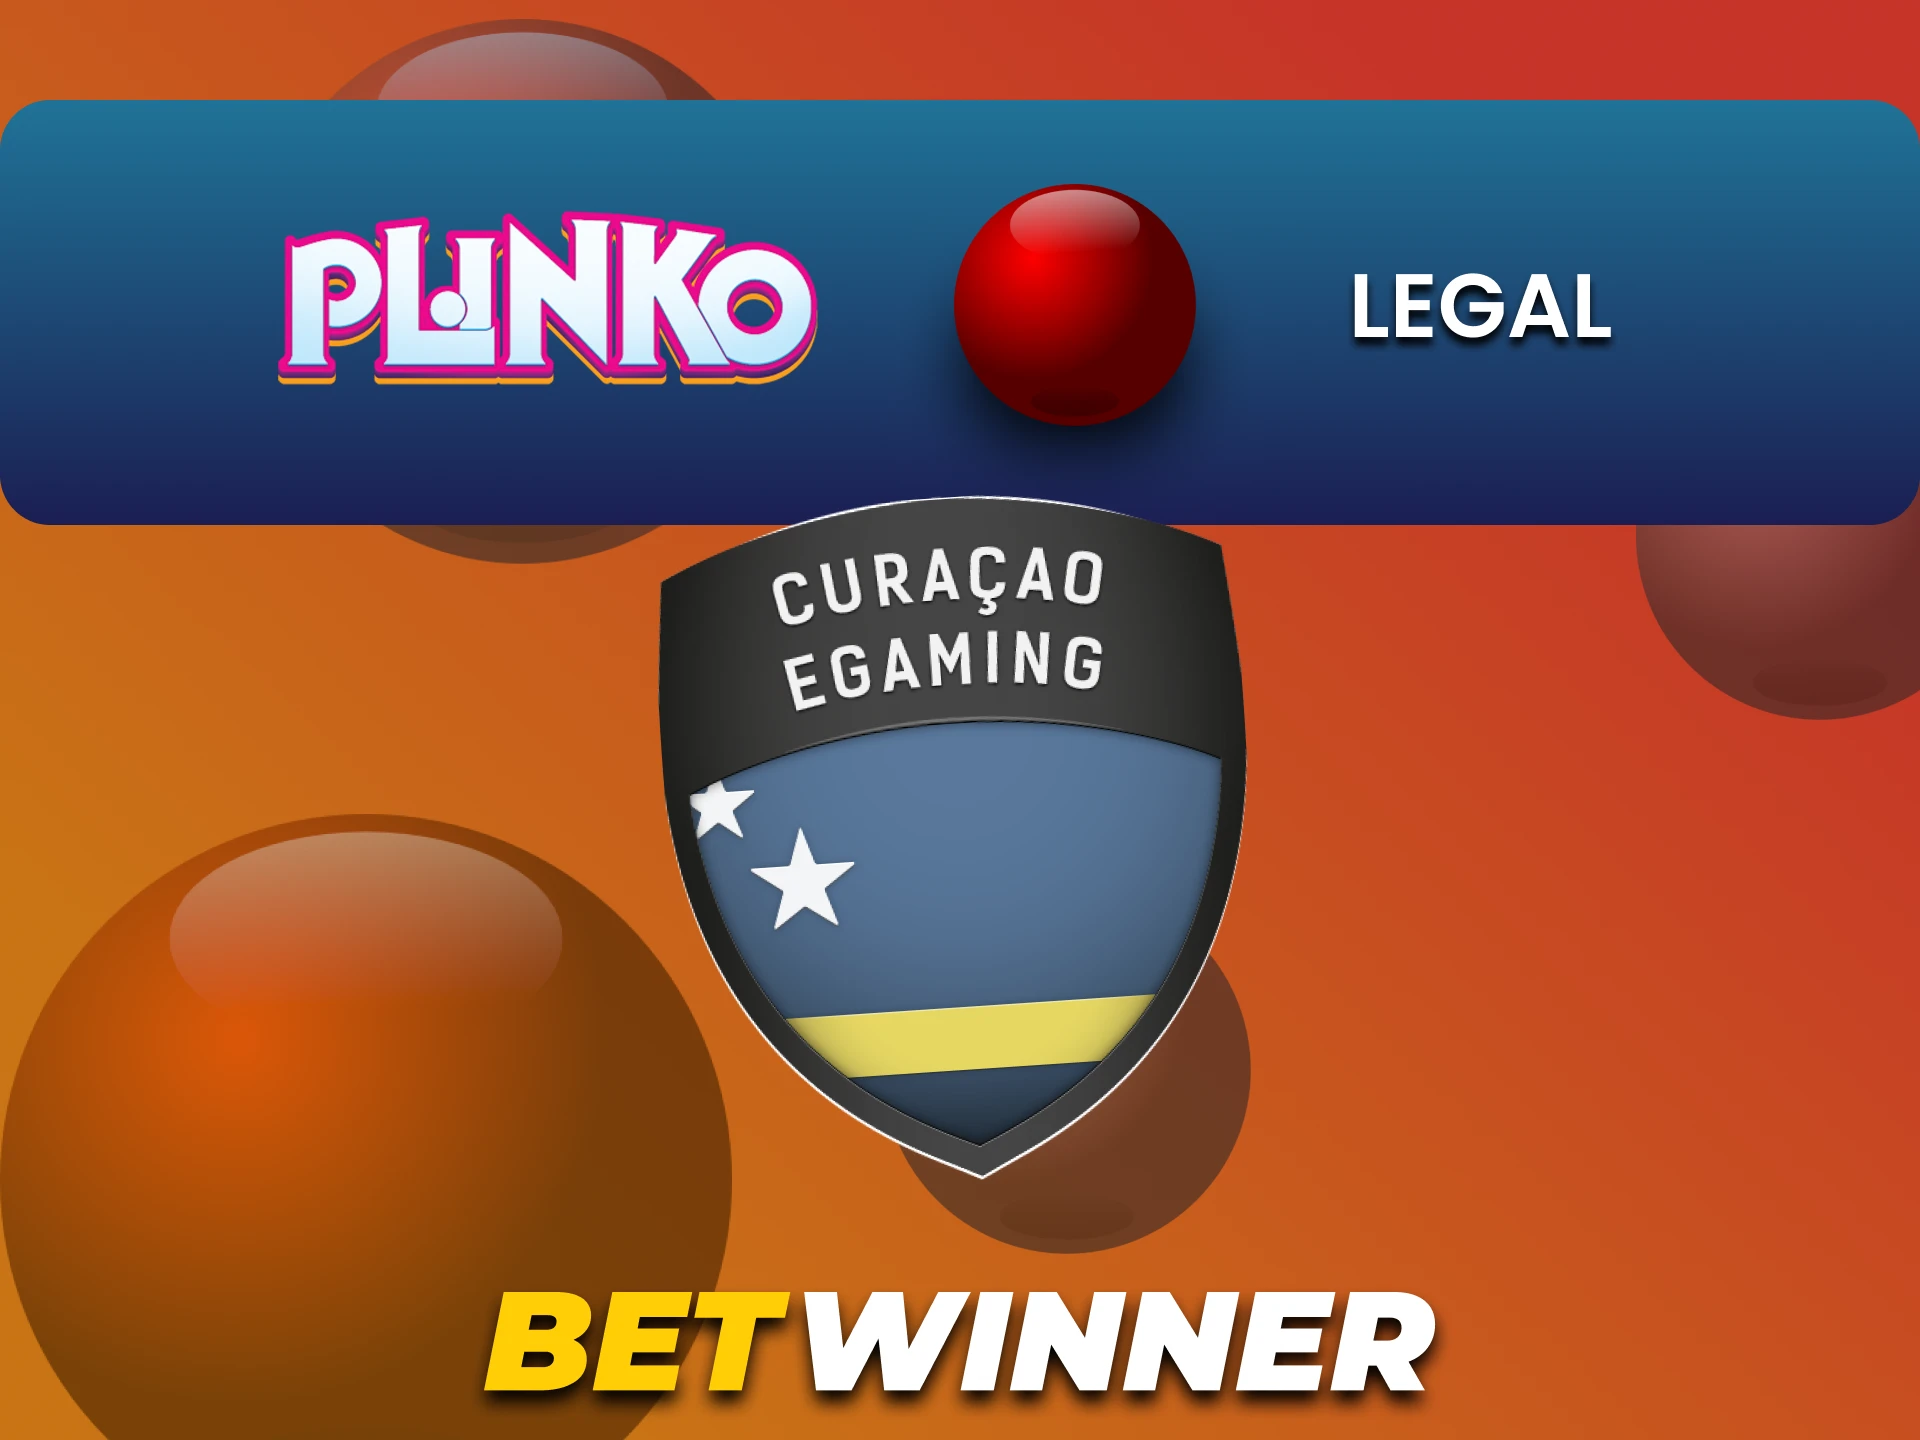 Betwinner is a legal site to play Plinko.